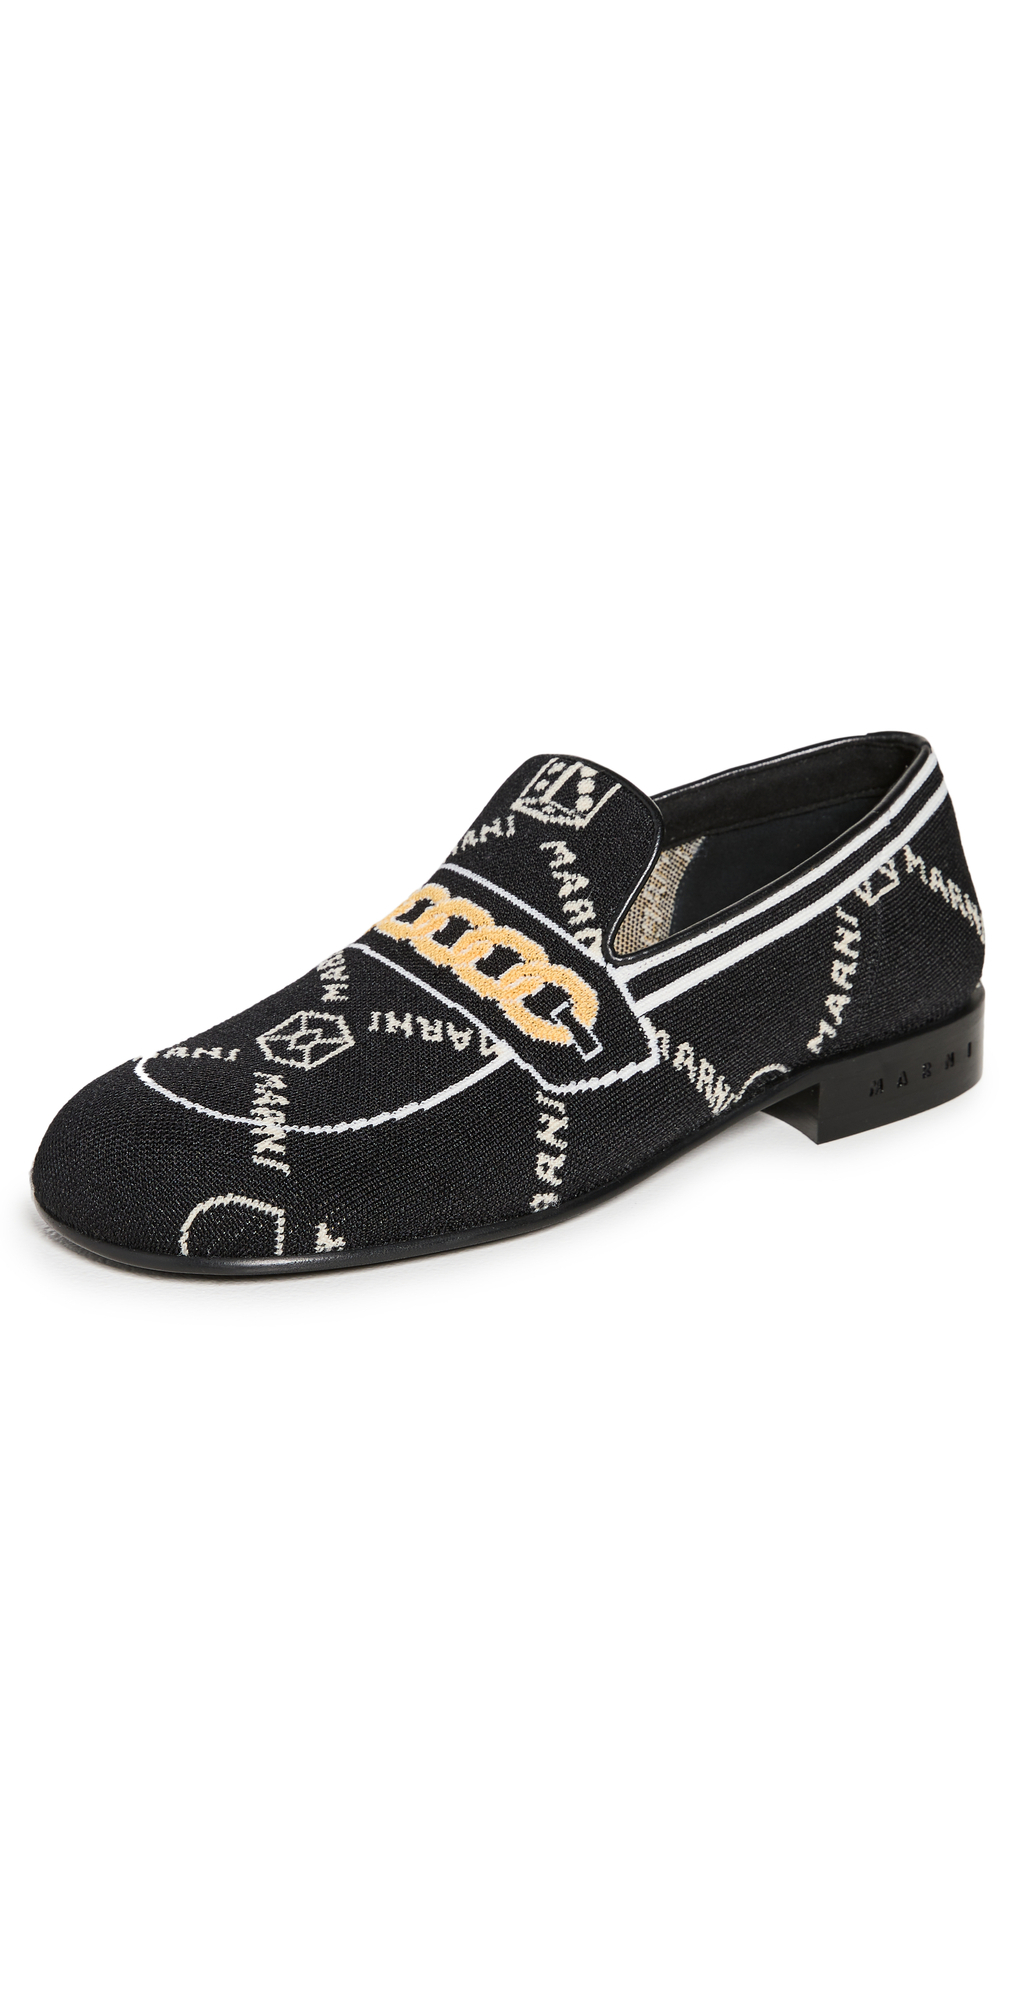 Marni Moccasin Shoes in black / white